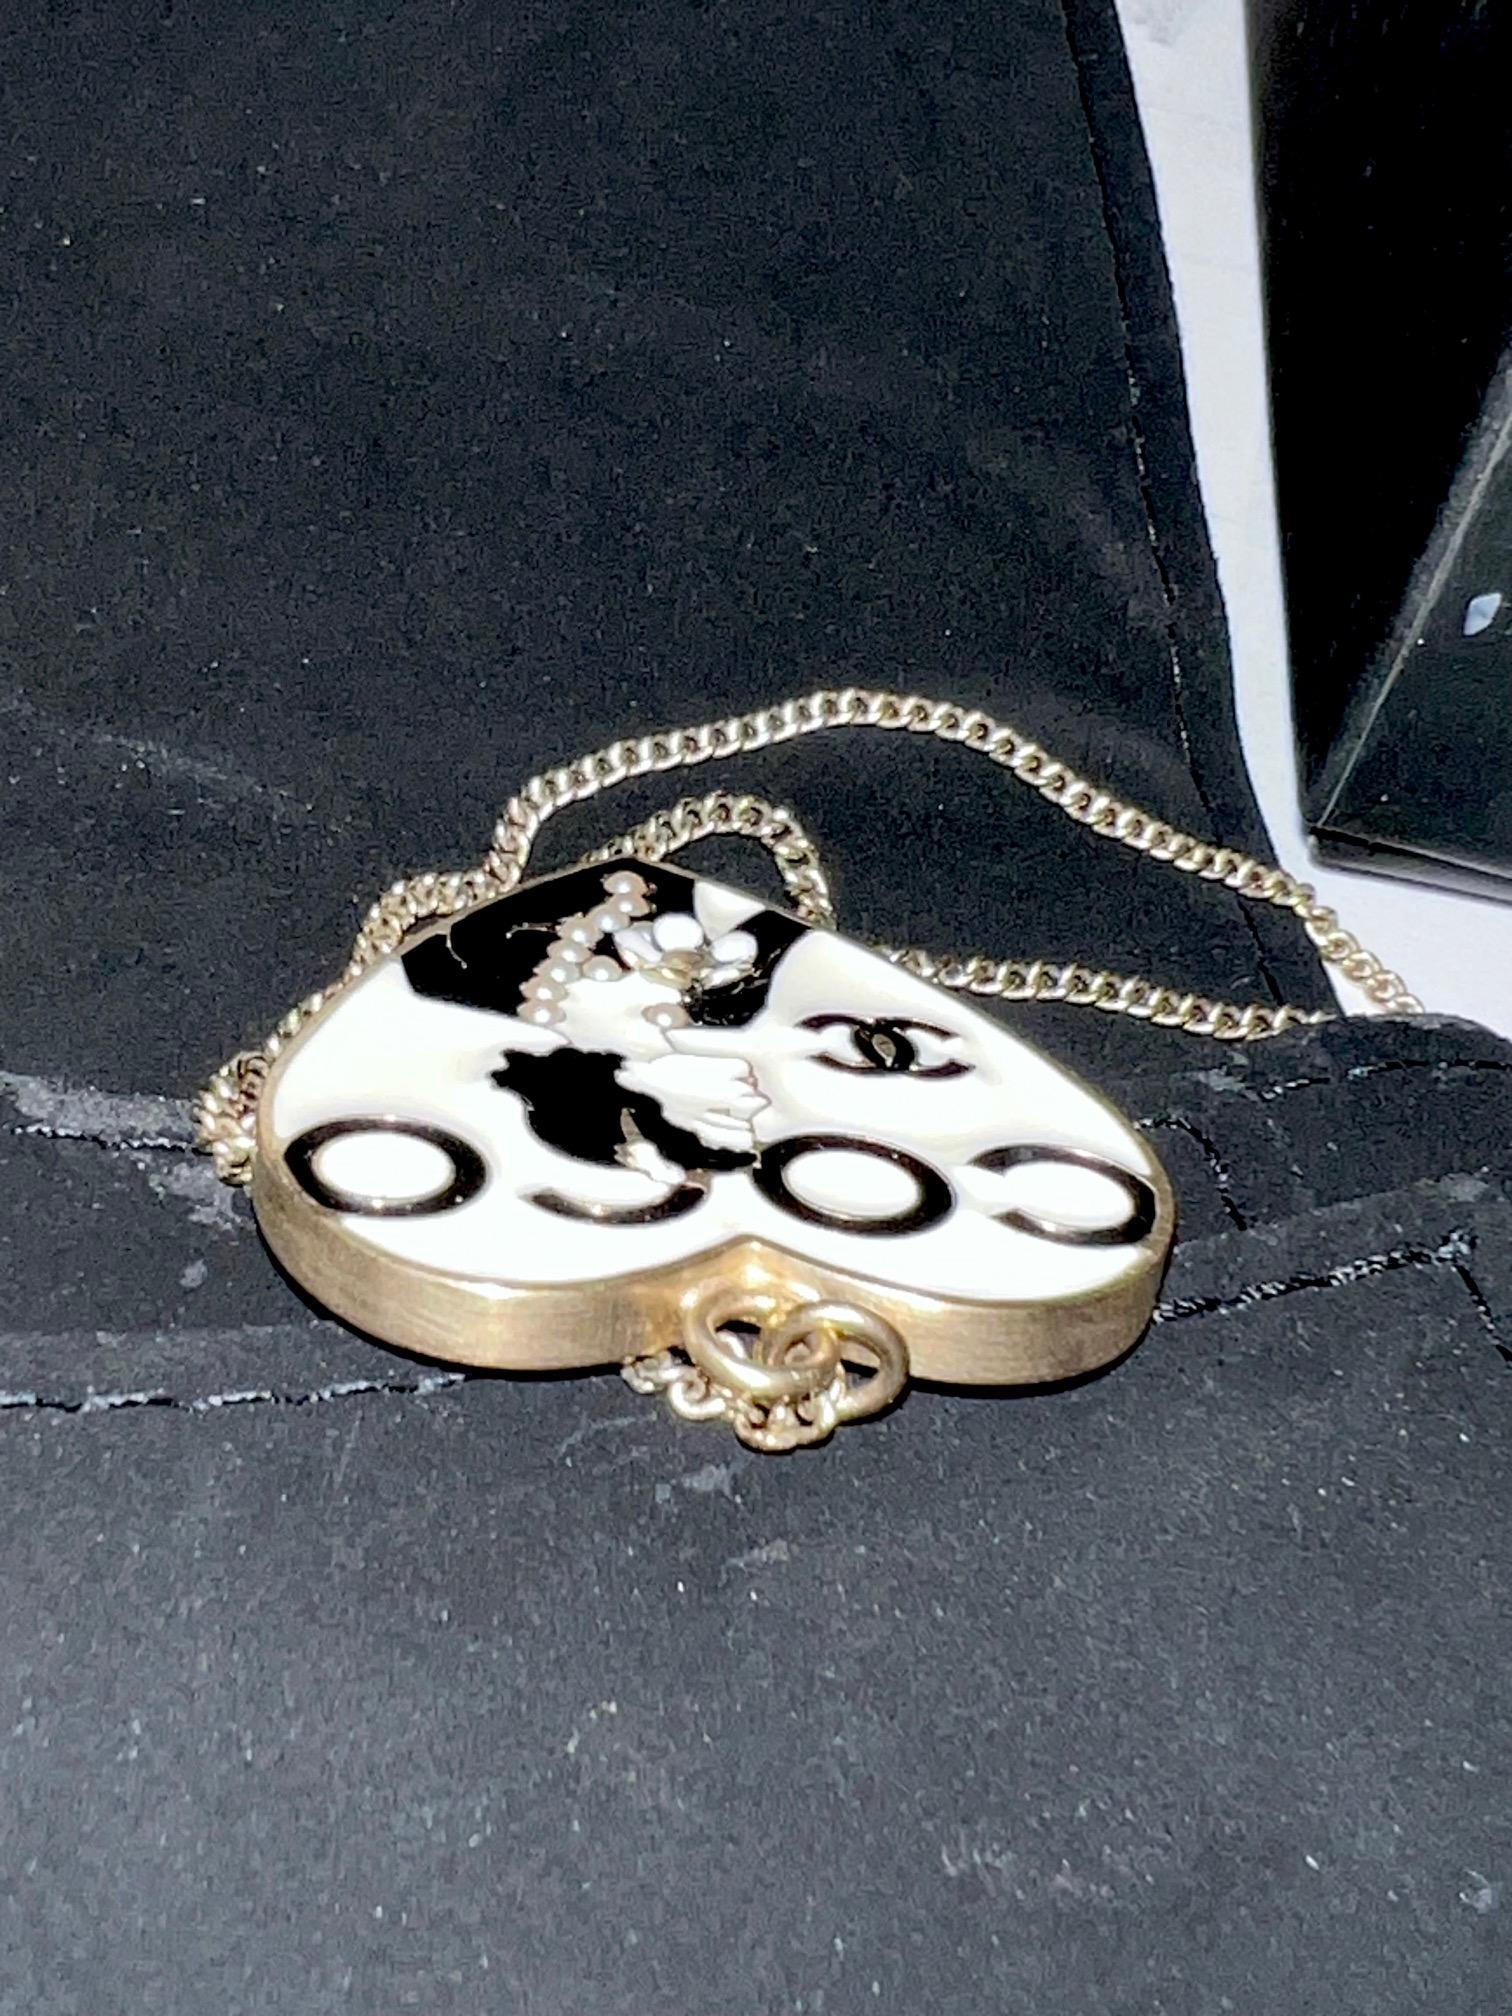 Preowned 100% Authentic 
CHANEL Coco Enamel Heart Necklace
CONDITION: B   very good, well maintained shows minor
signs of use, upon close inspection on back and end of
chain has scratches
MATERIAL: enamel
LENGTH :23'' long  
CHAIN:  12' in  can be